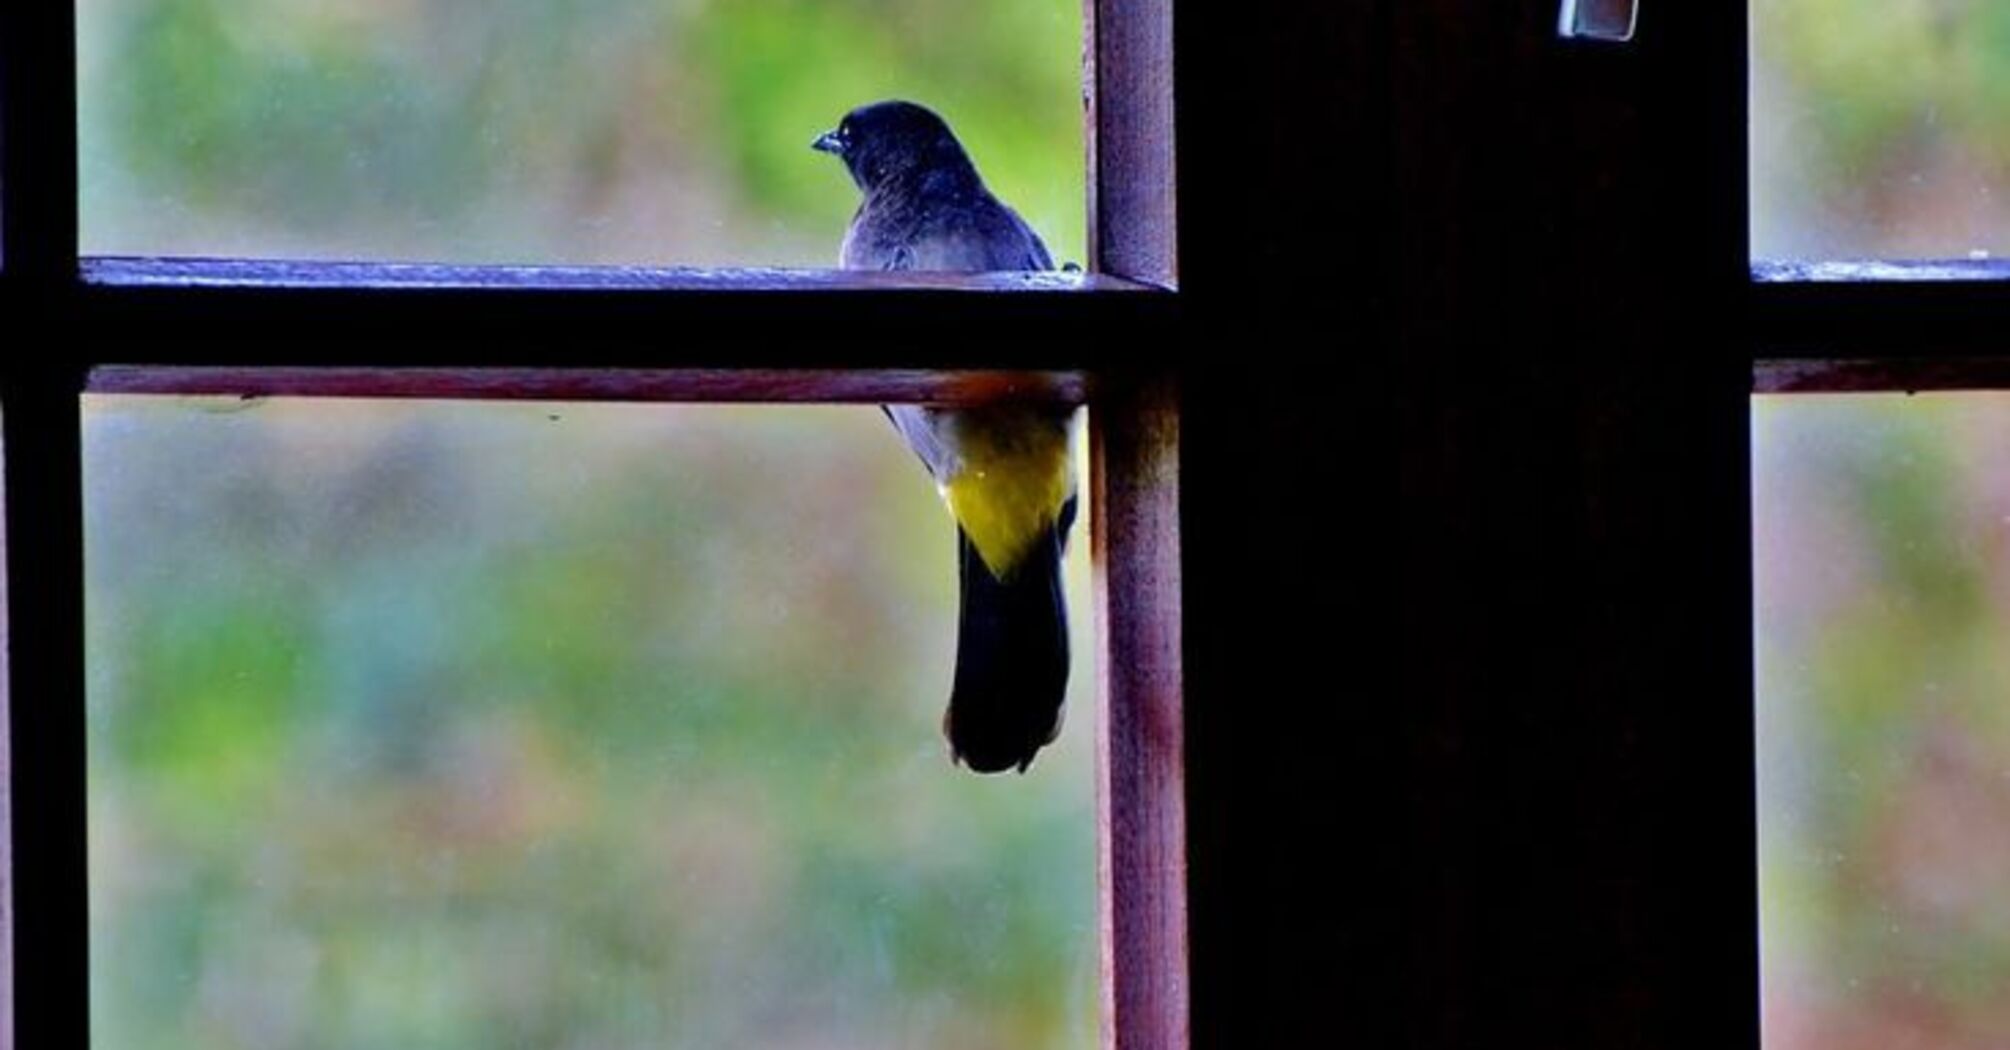 What to do if a bird knocks on the window